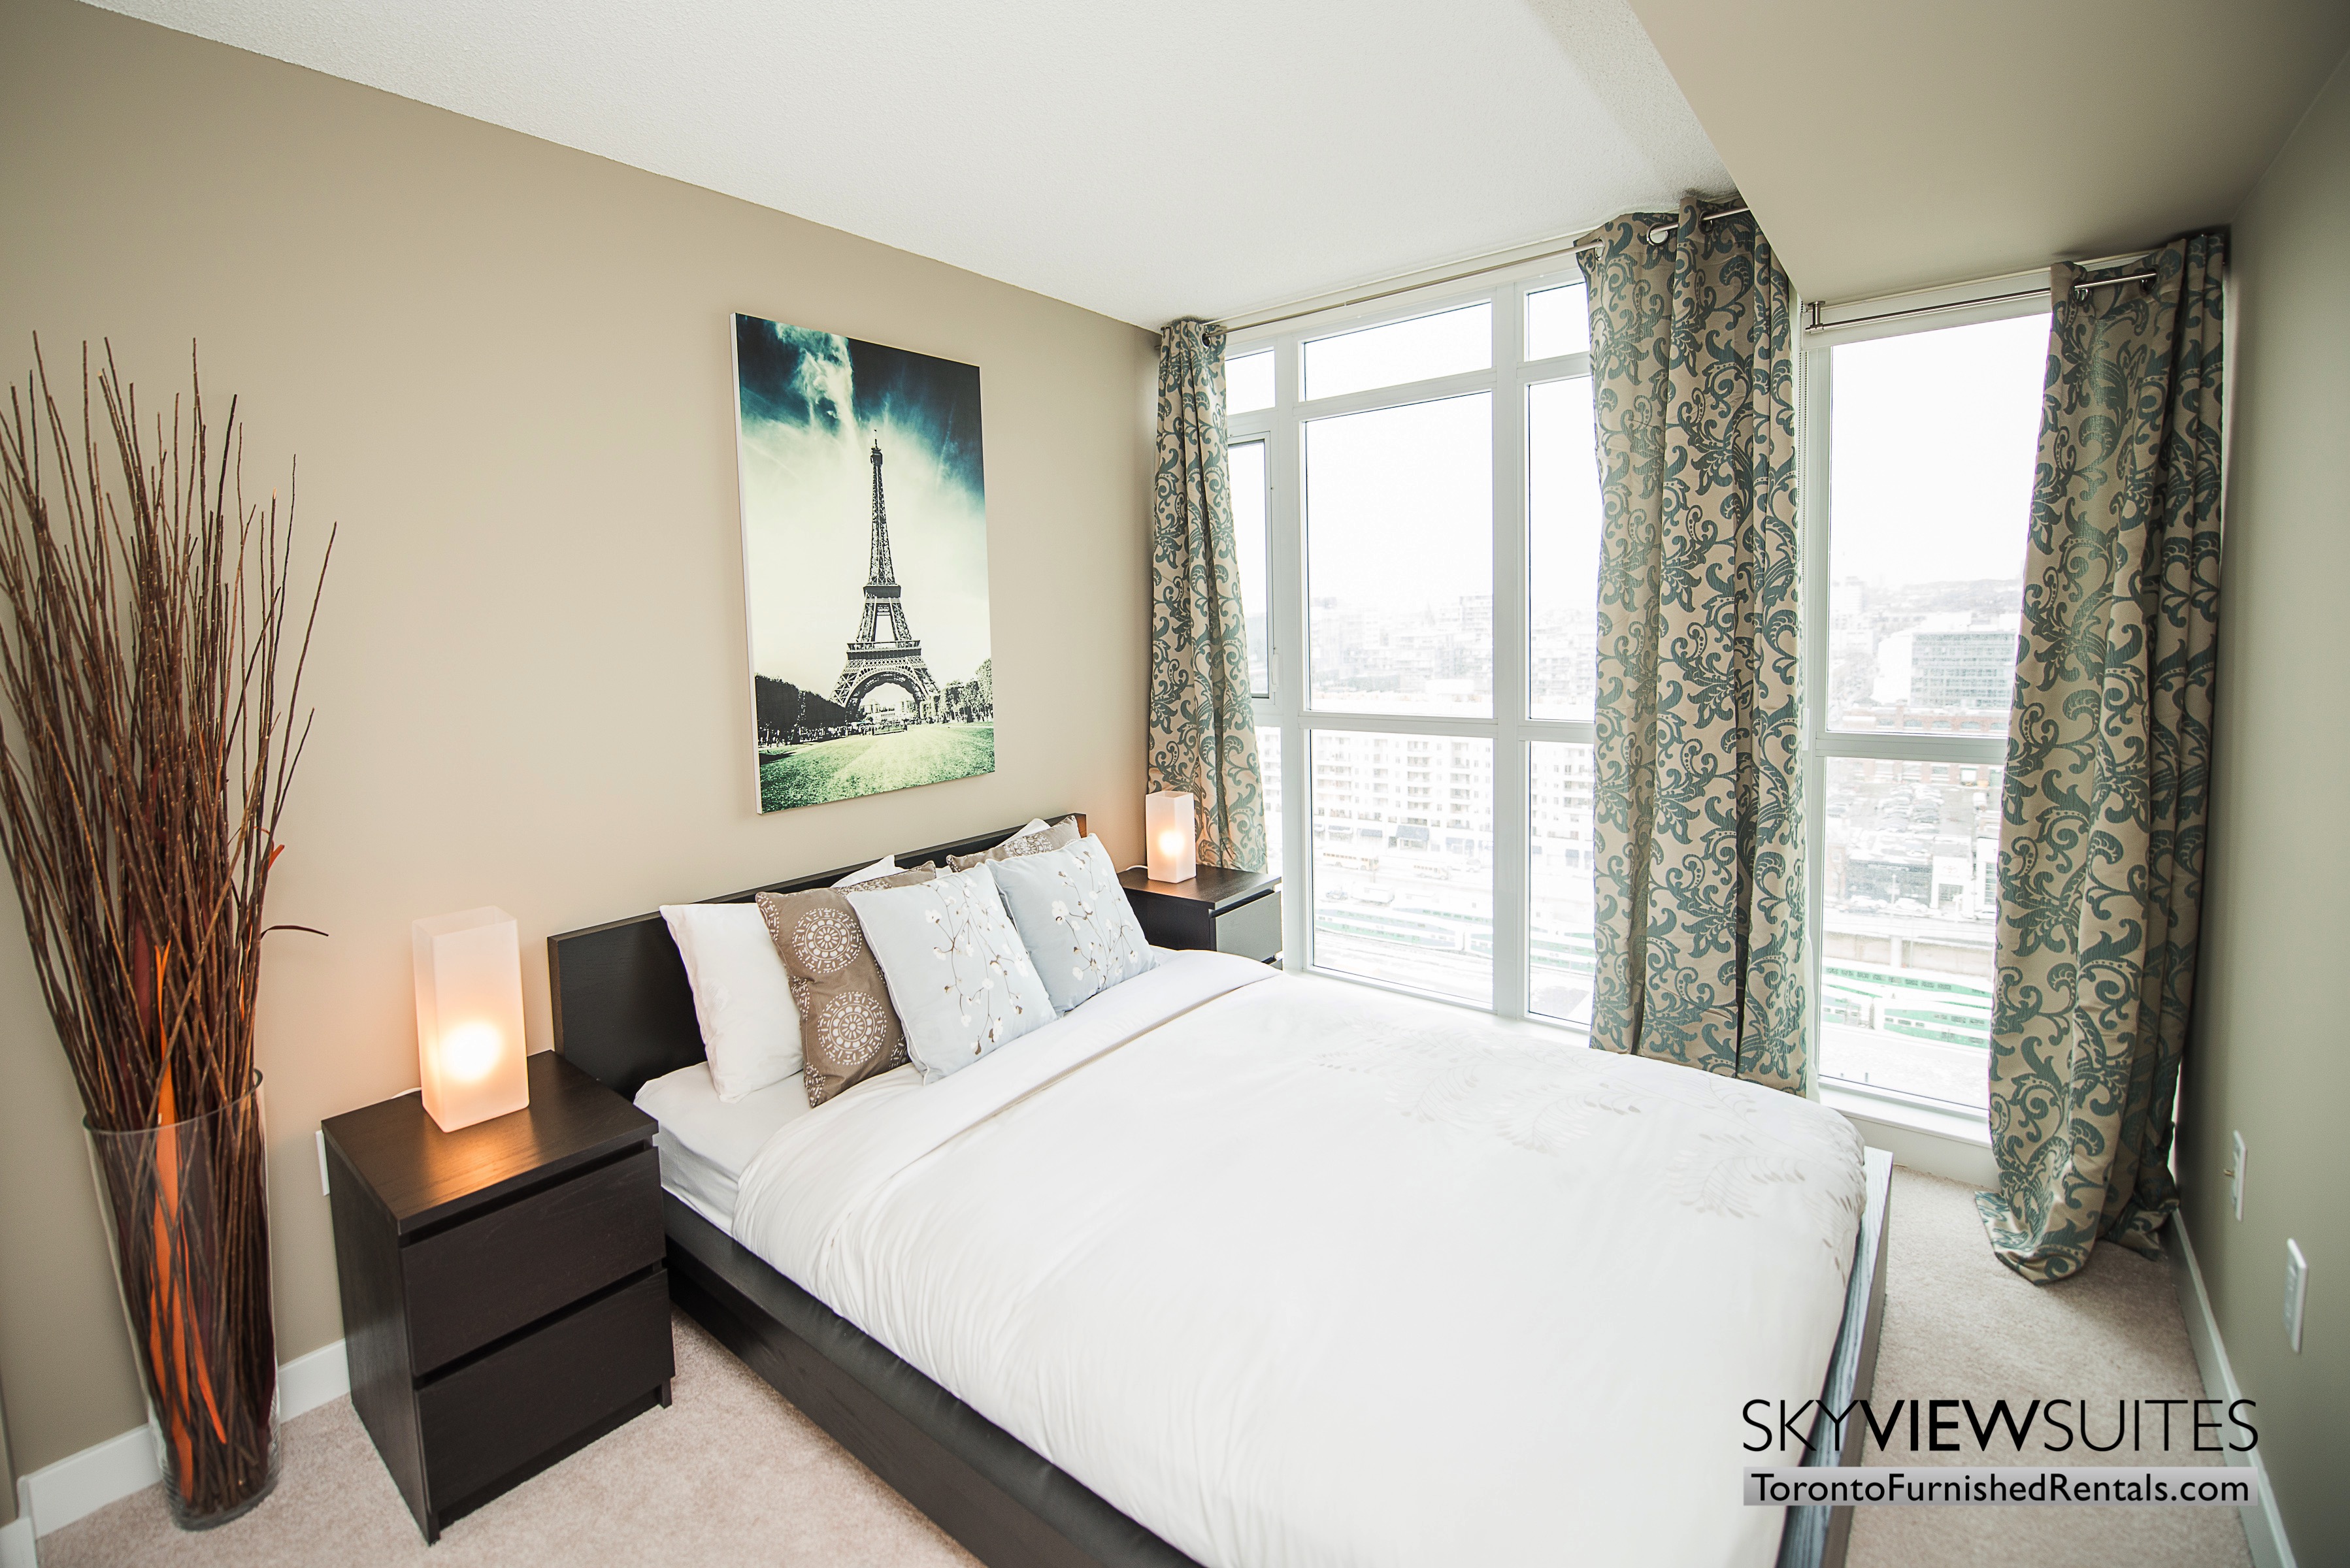 furnished apartments toronto parade bedroom with window